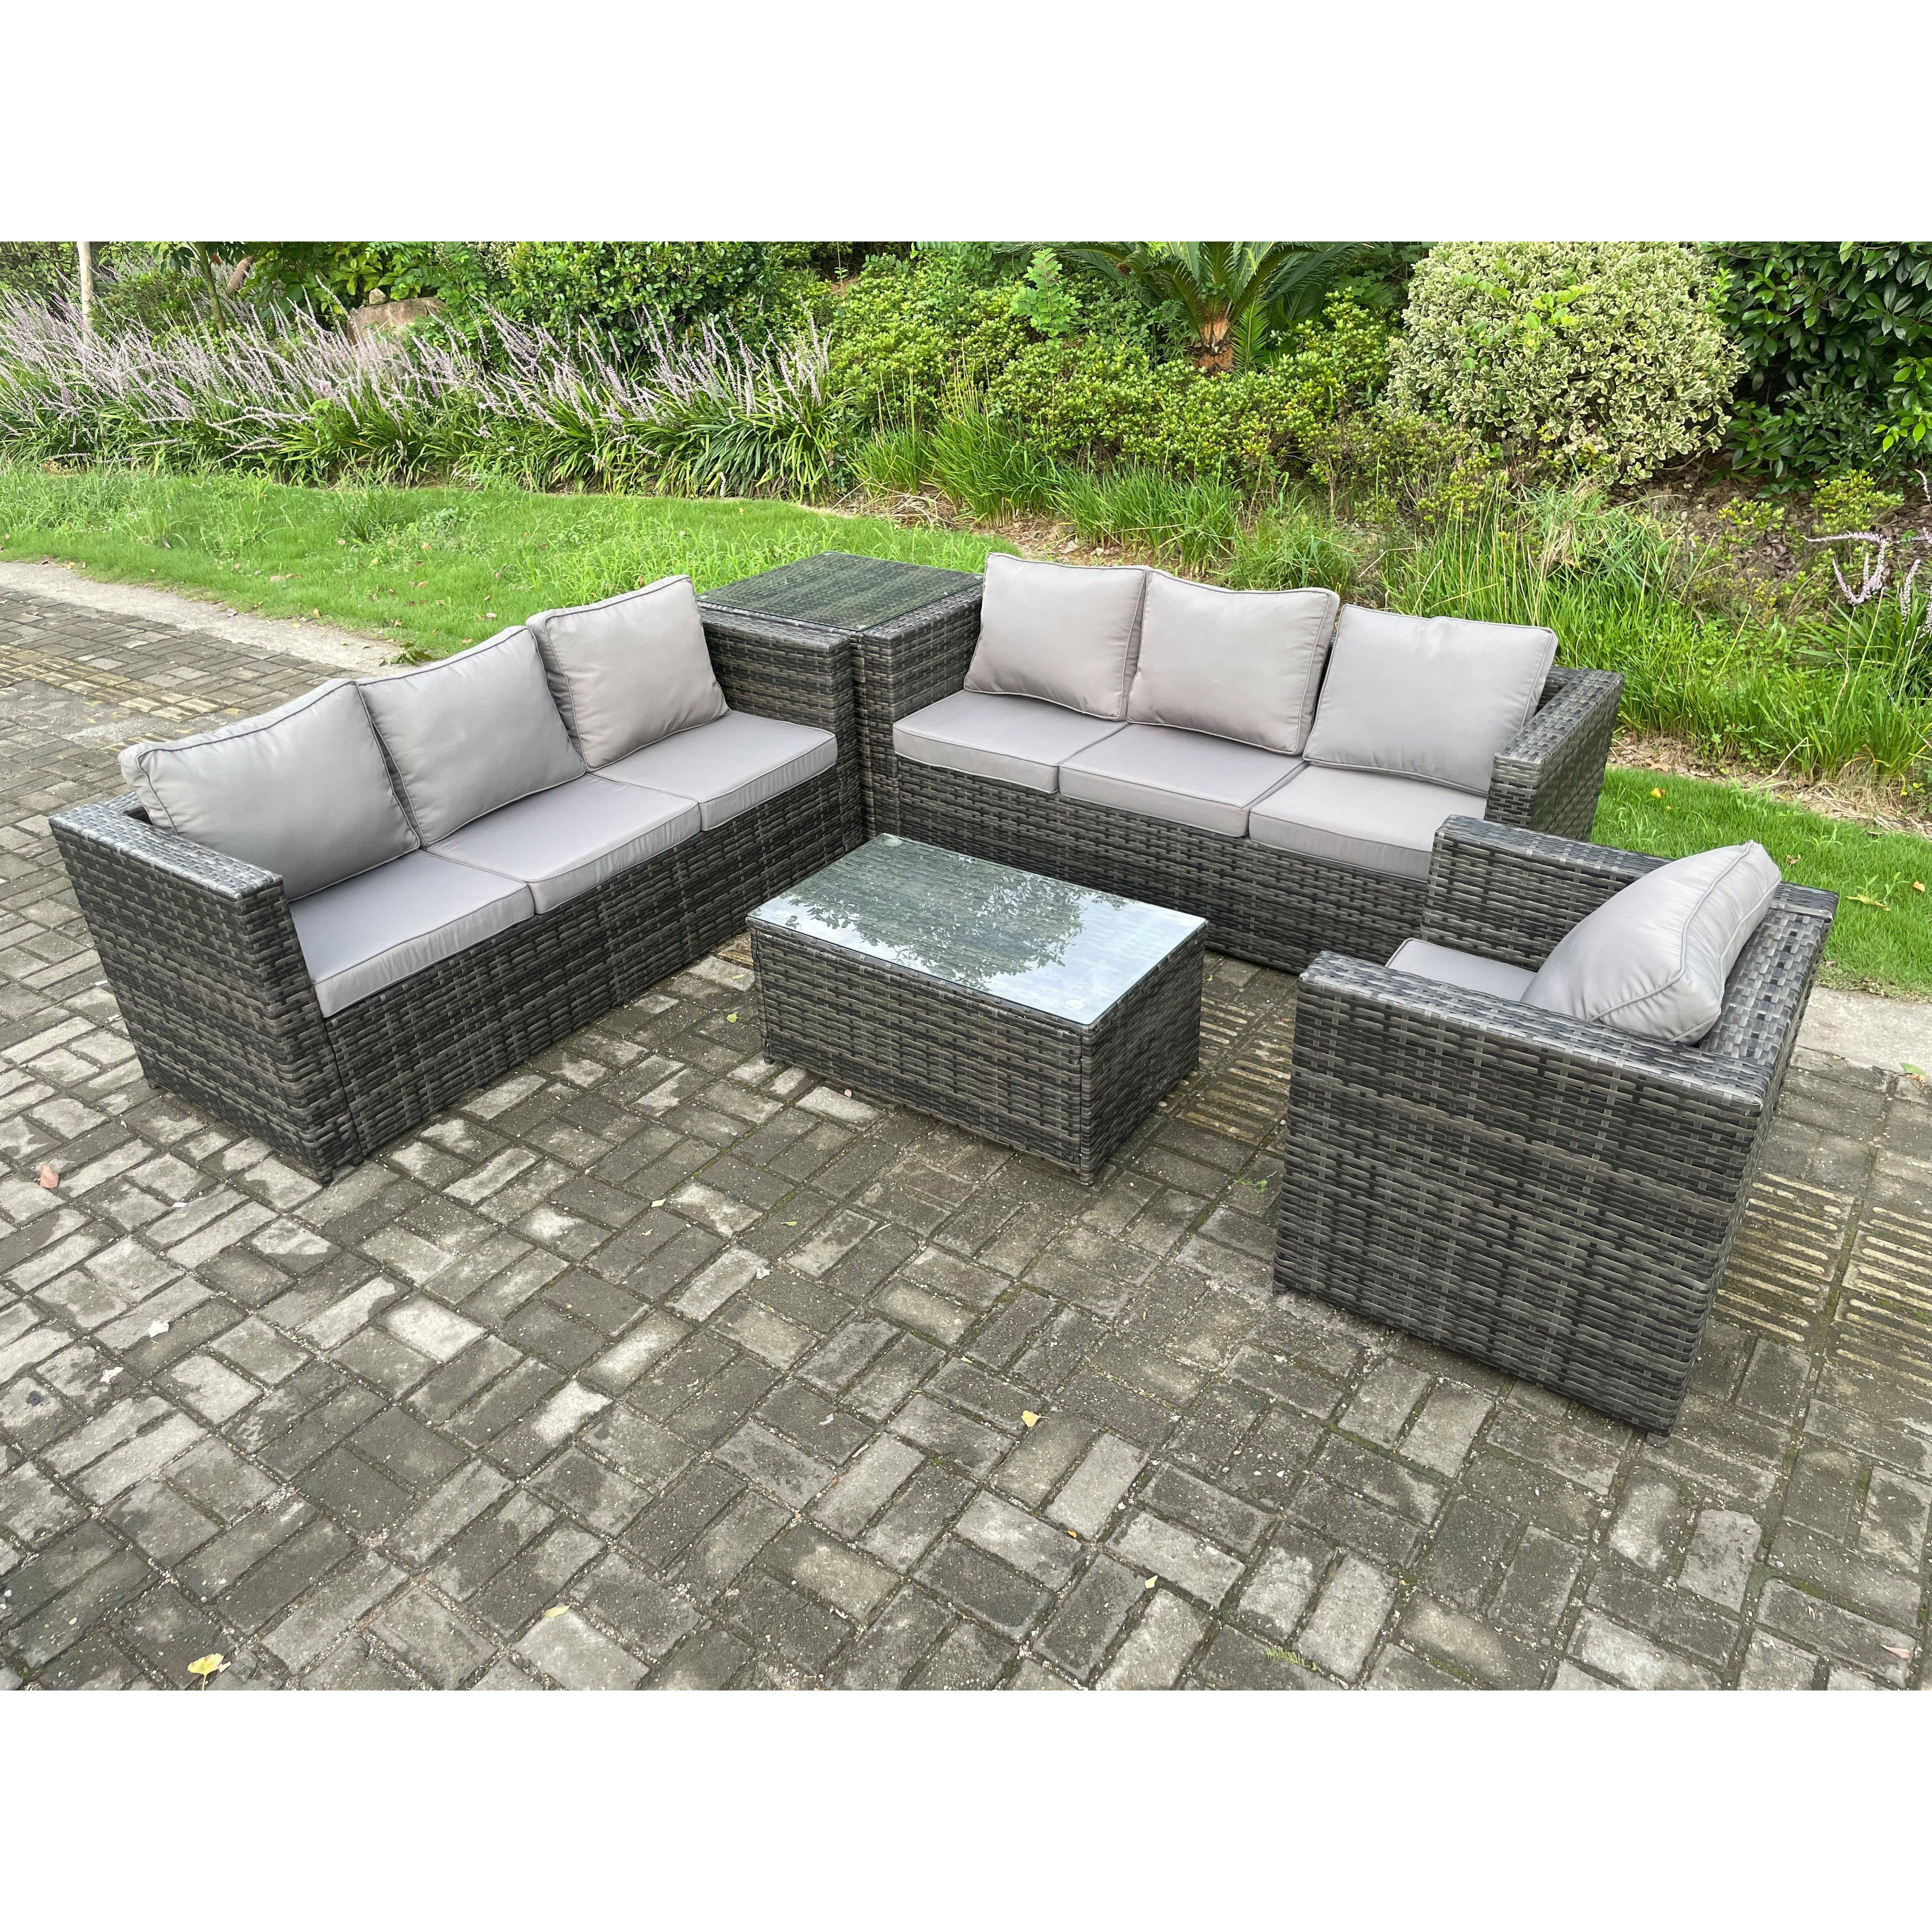 Wicker PE Rattan Sofa Set Outdoor Patio Garden Furniture with Armchair Side Table Oblong Coffee Table Dark Grey Mixed - image 1